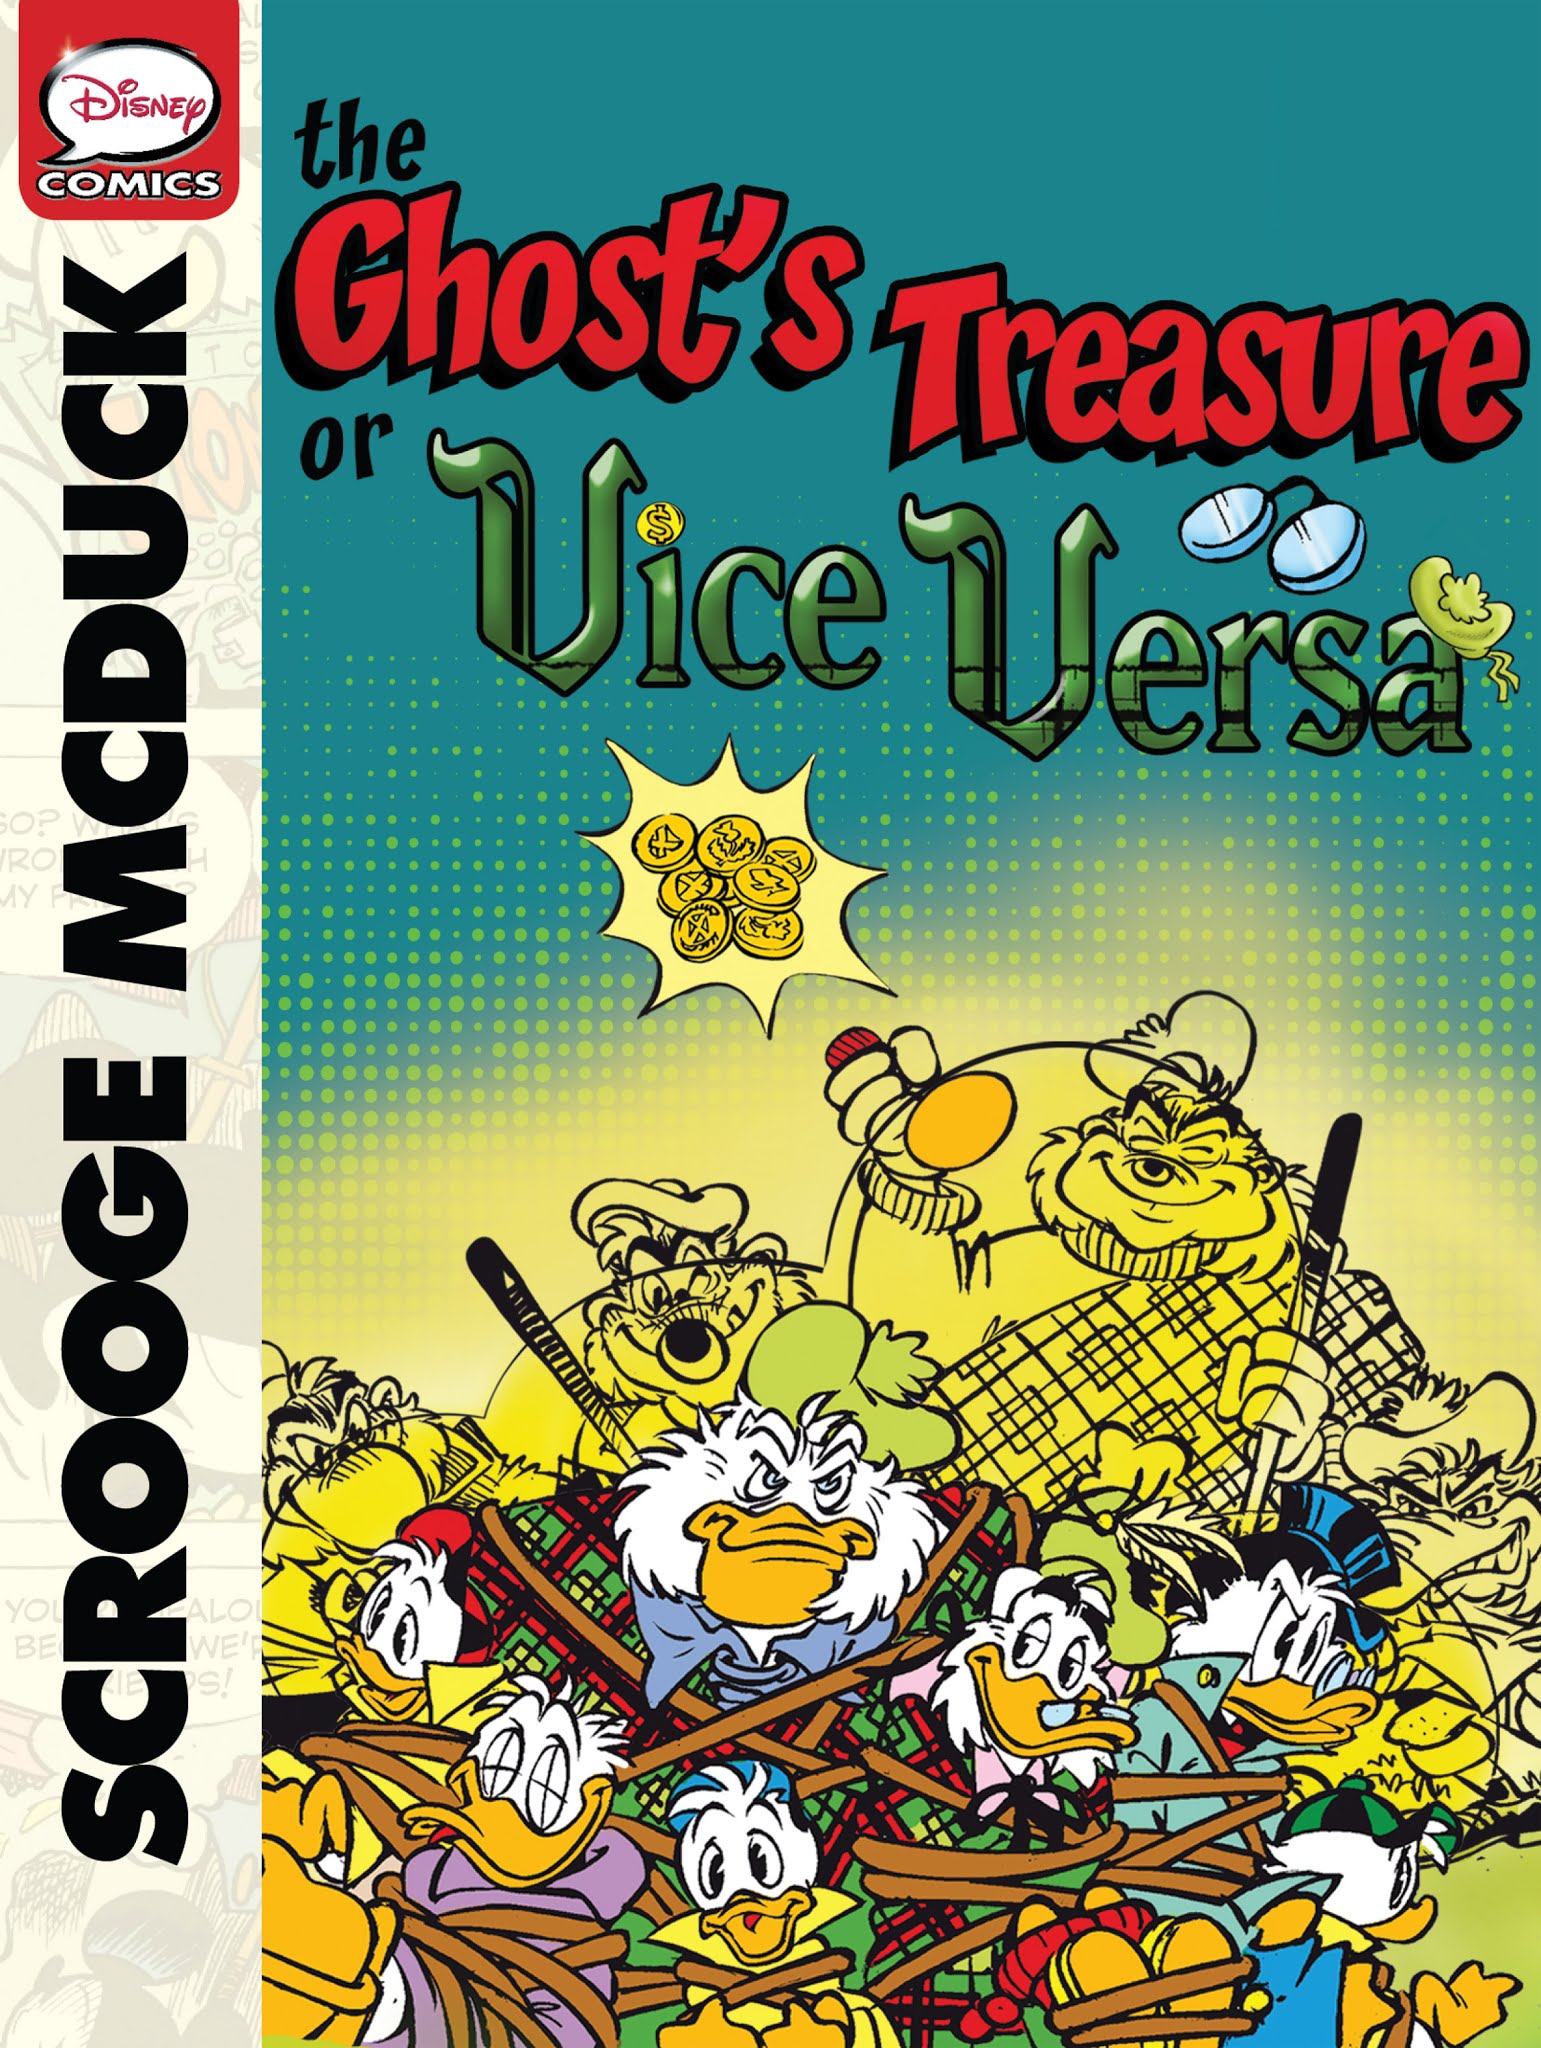 Read online Scrooge McDuck and the Ghost's Treasure (or Vice Versa) comic -  Issue # Full - 1